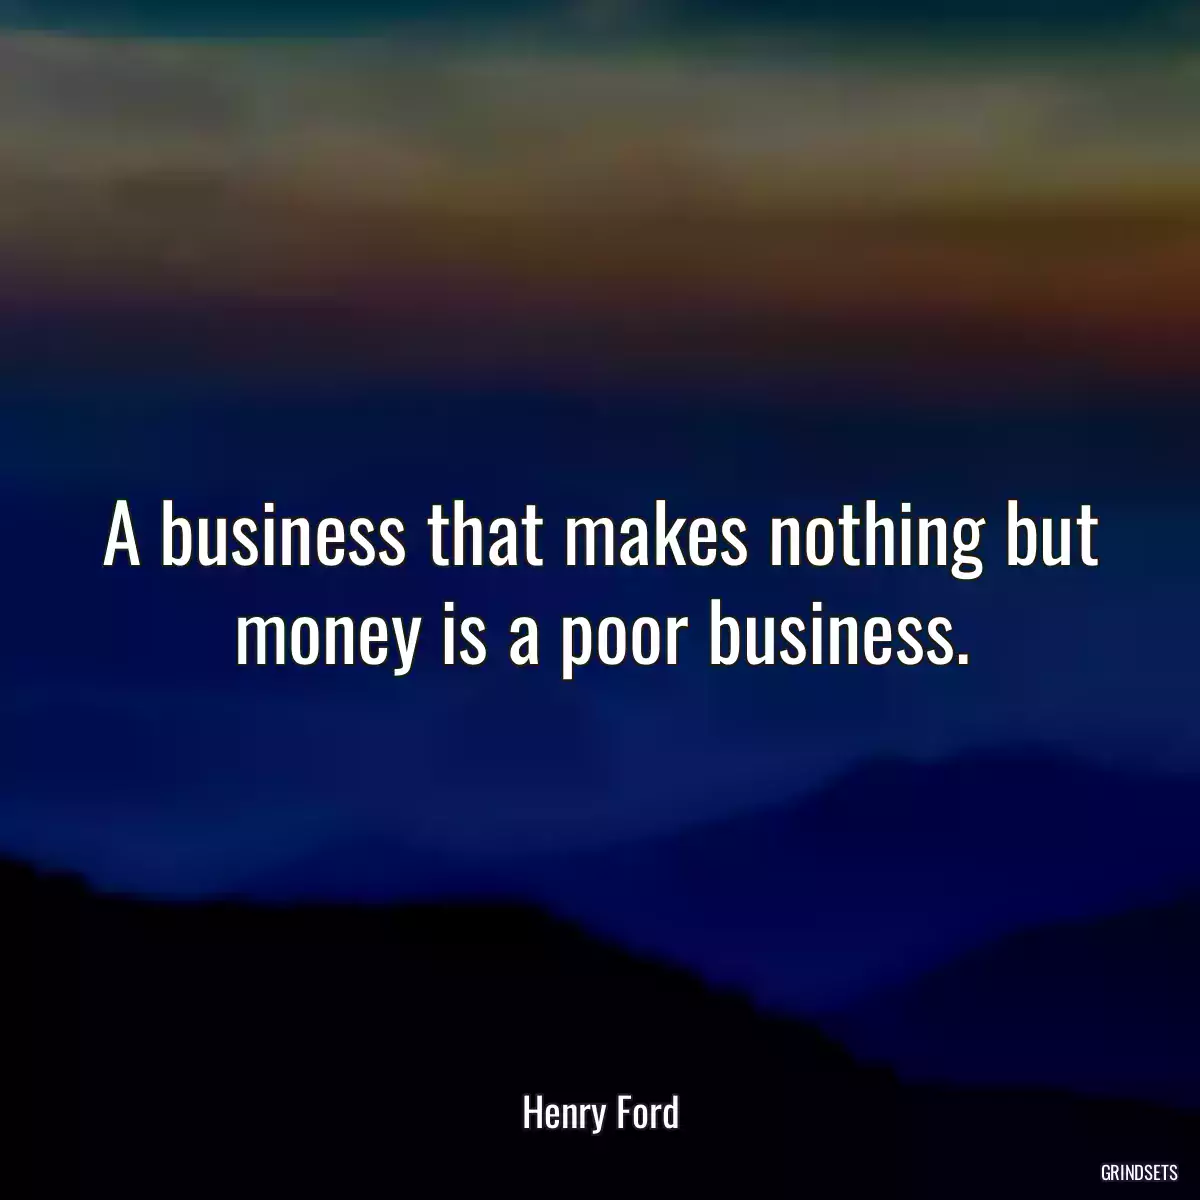 A business that makes nothing but money is a poor business.